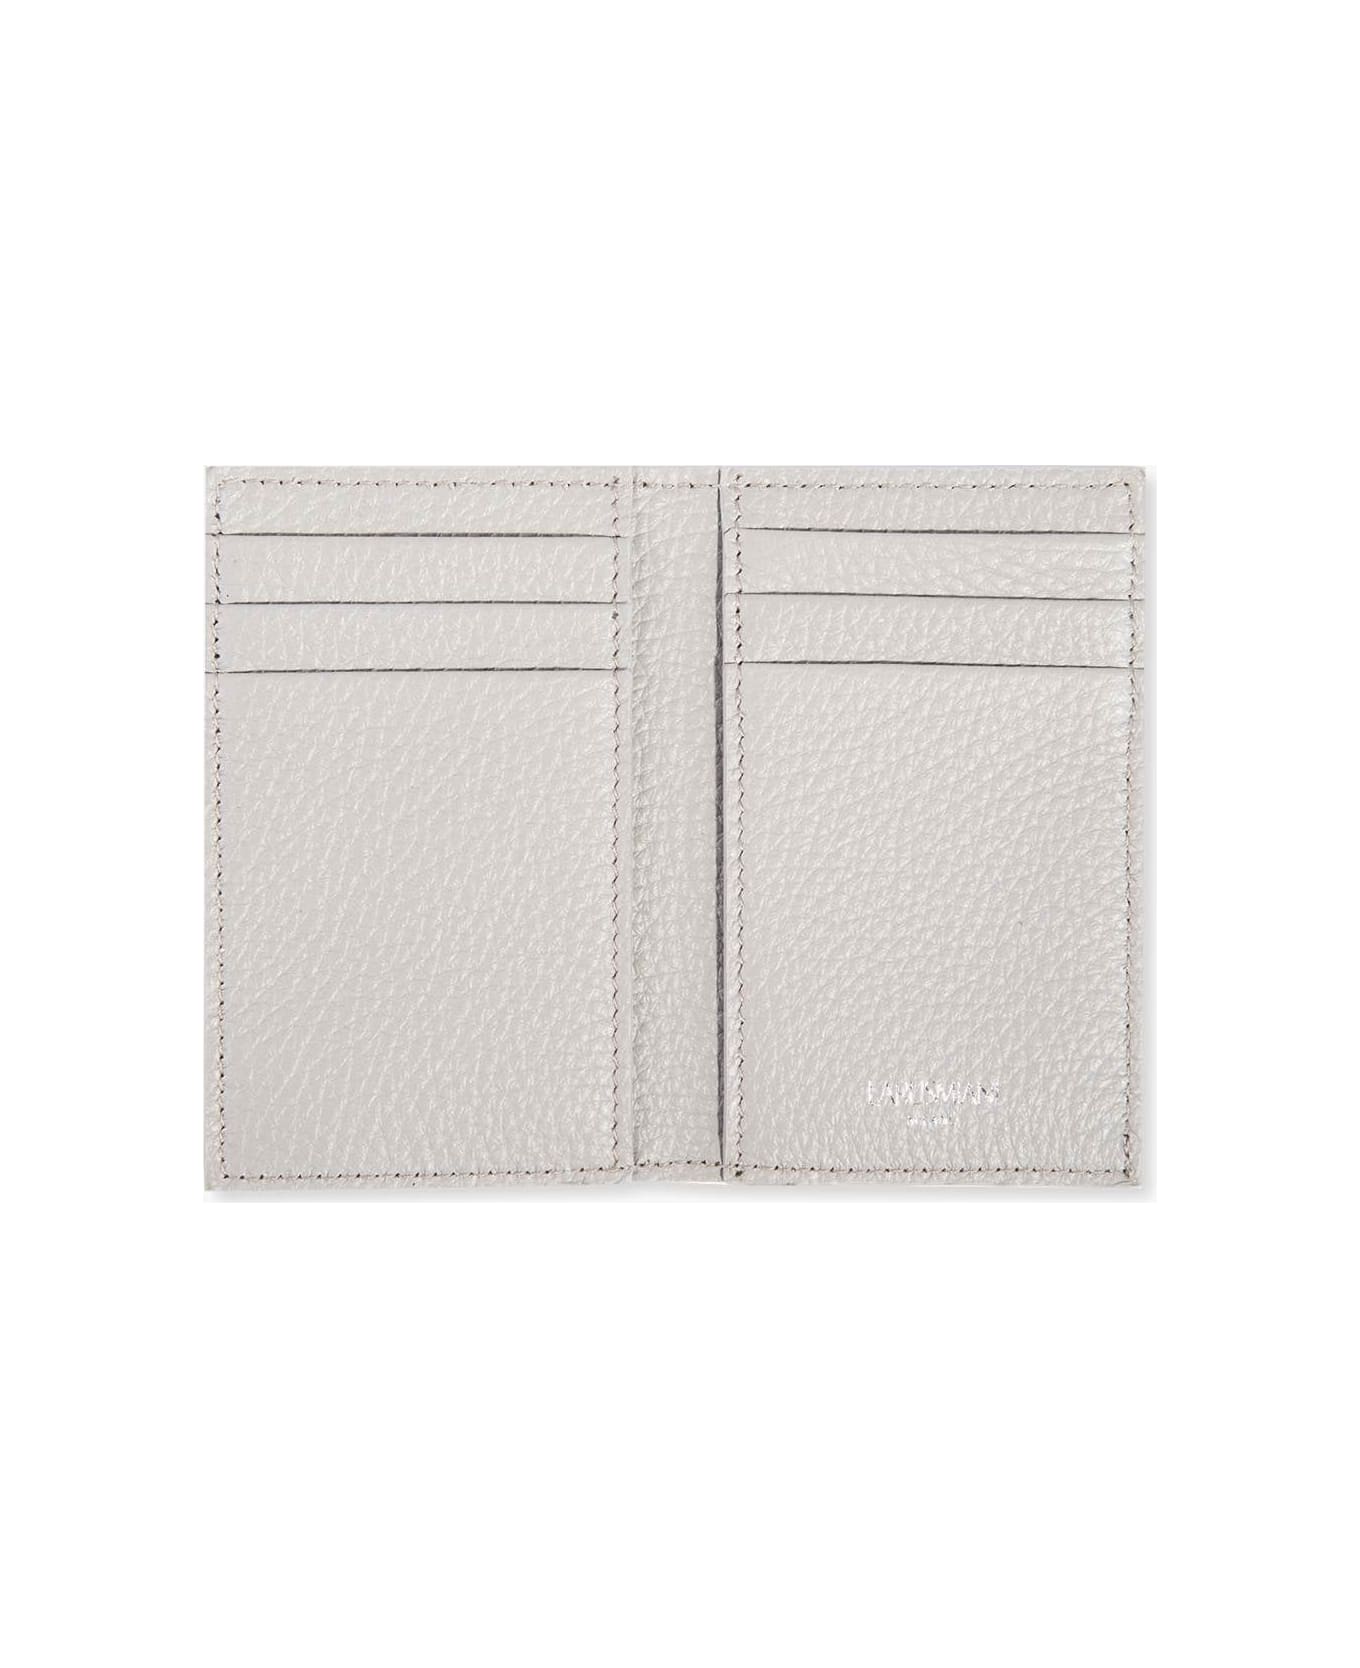 Larusmiani Card Holder 'amedeo' Wallet - DimGray 財布